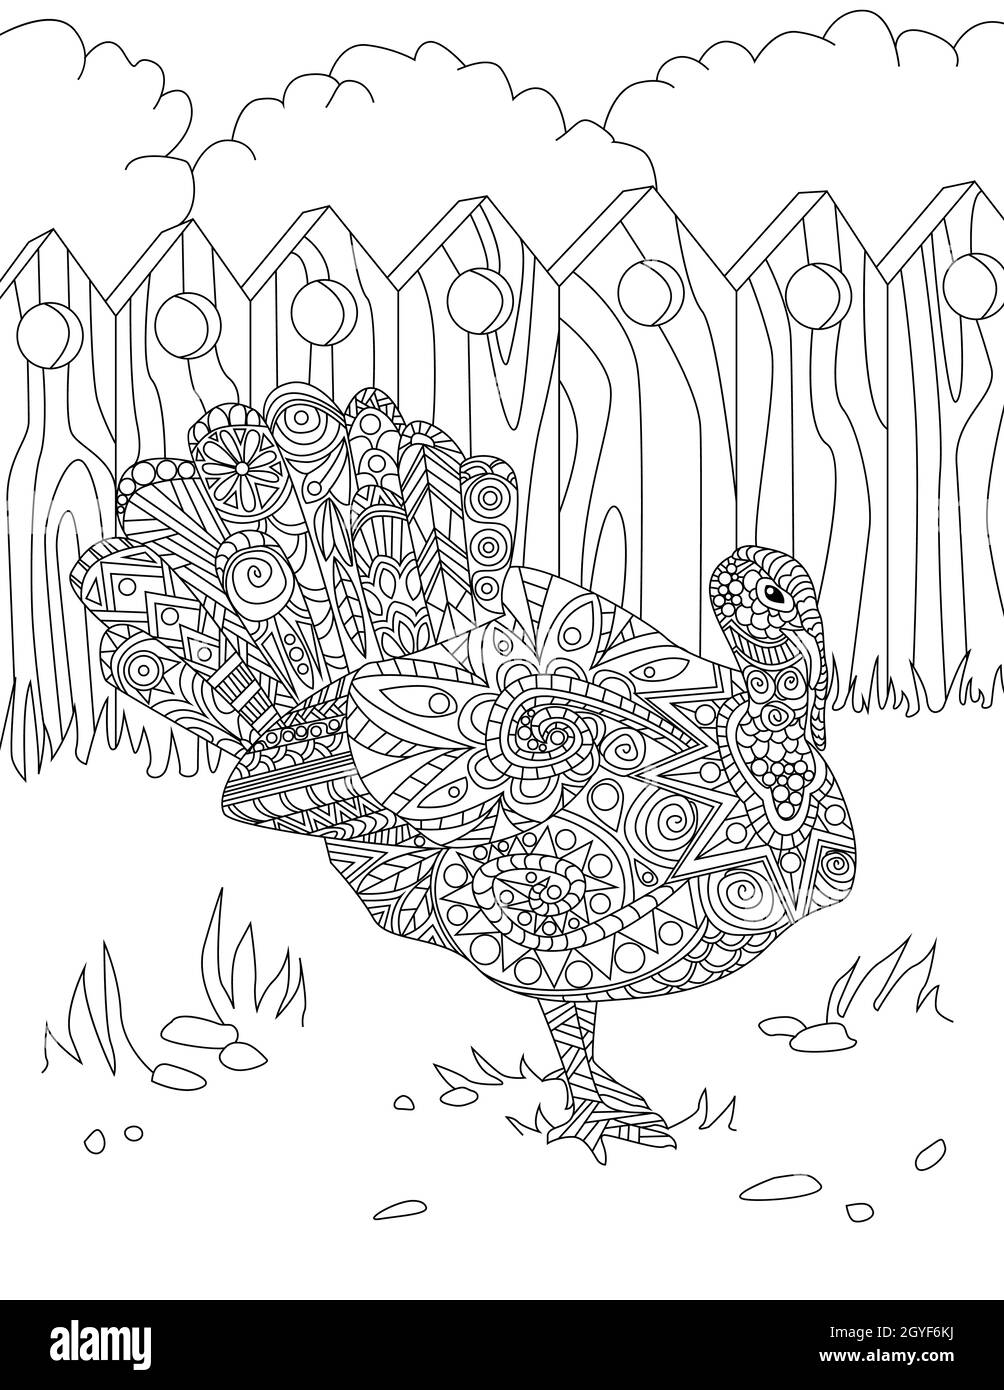 Line Drawing Of Peacock Bird Standing Alone Looking Away Inside Fence. Stock Photo